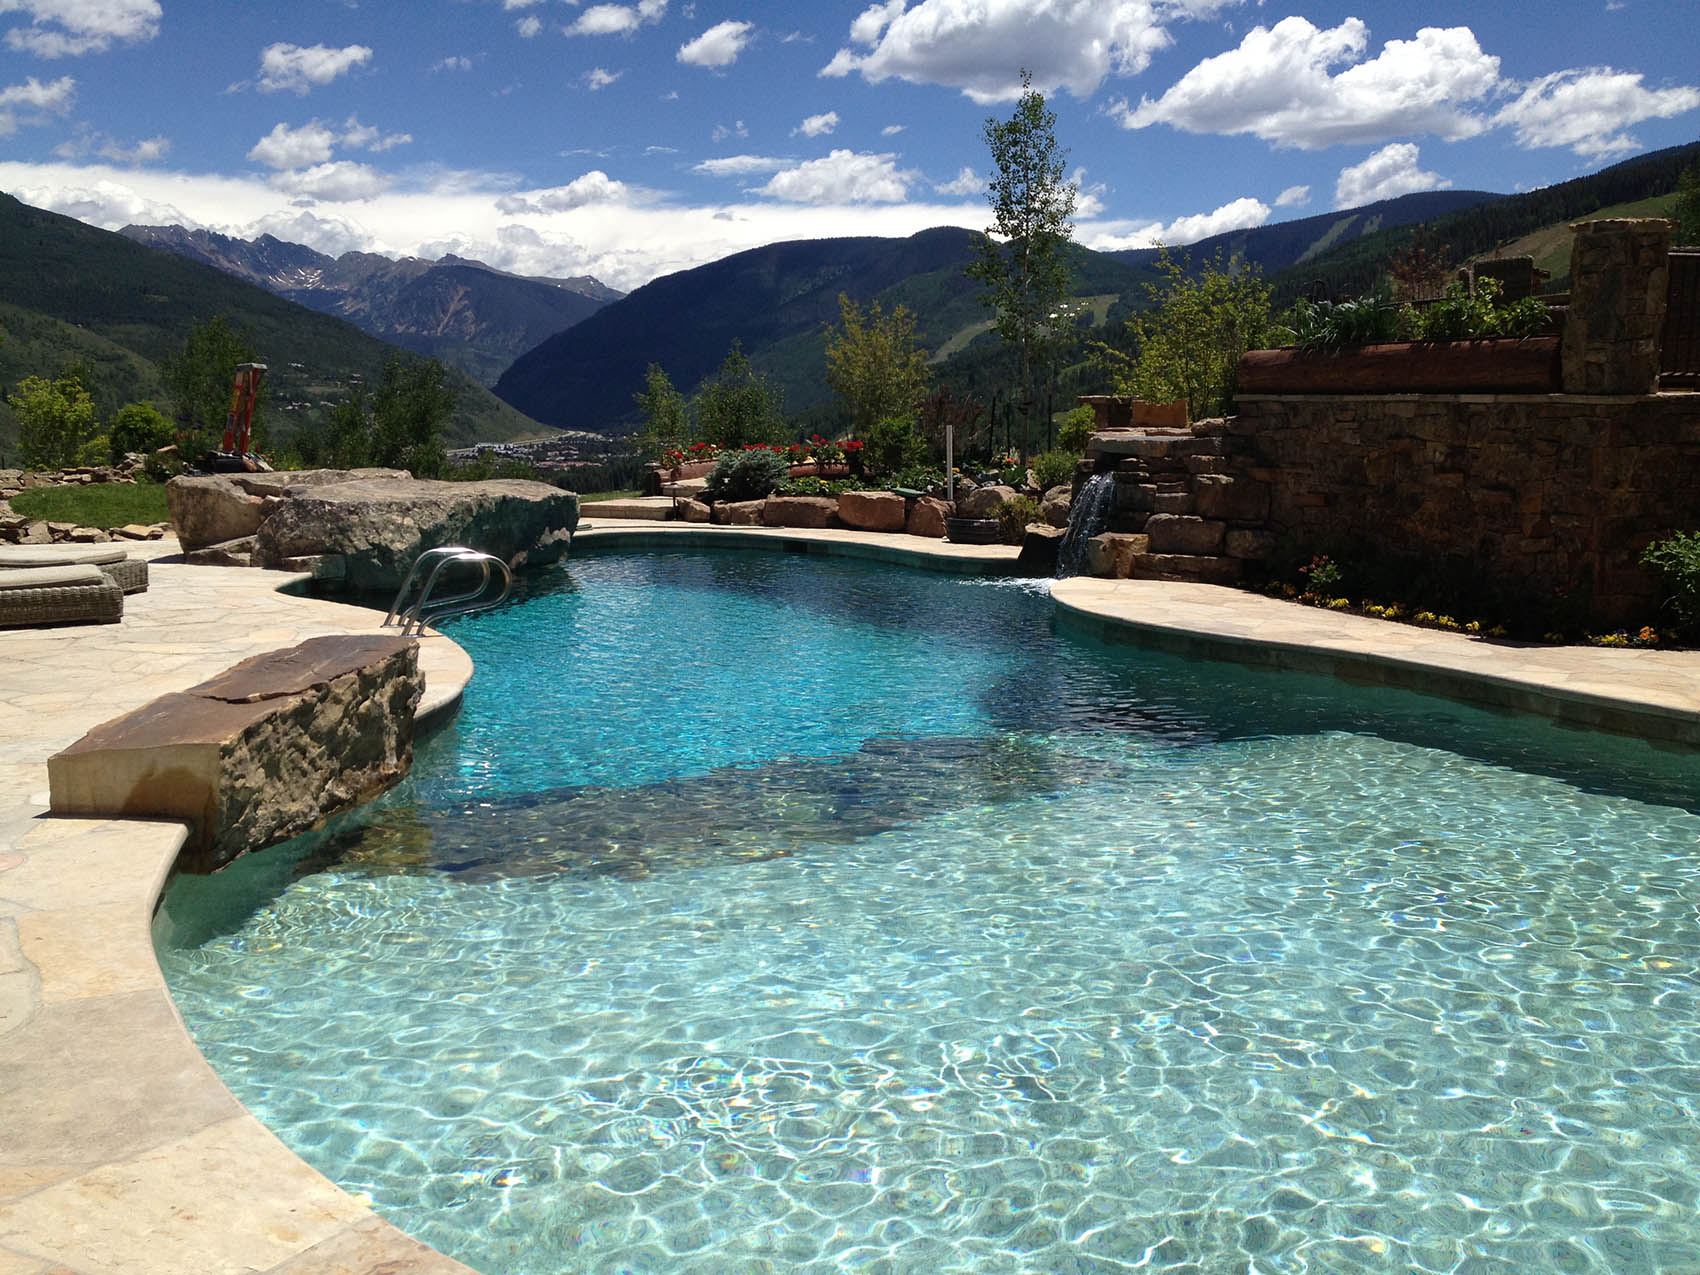 A luxurious outdoor swimming pool with clear blue water, natural stone edges, and a waterfall set against a backdrop of mountains and a clear sky.